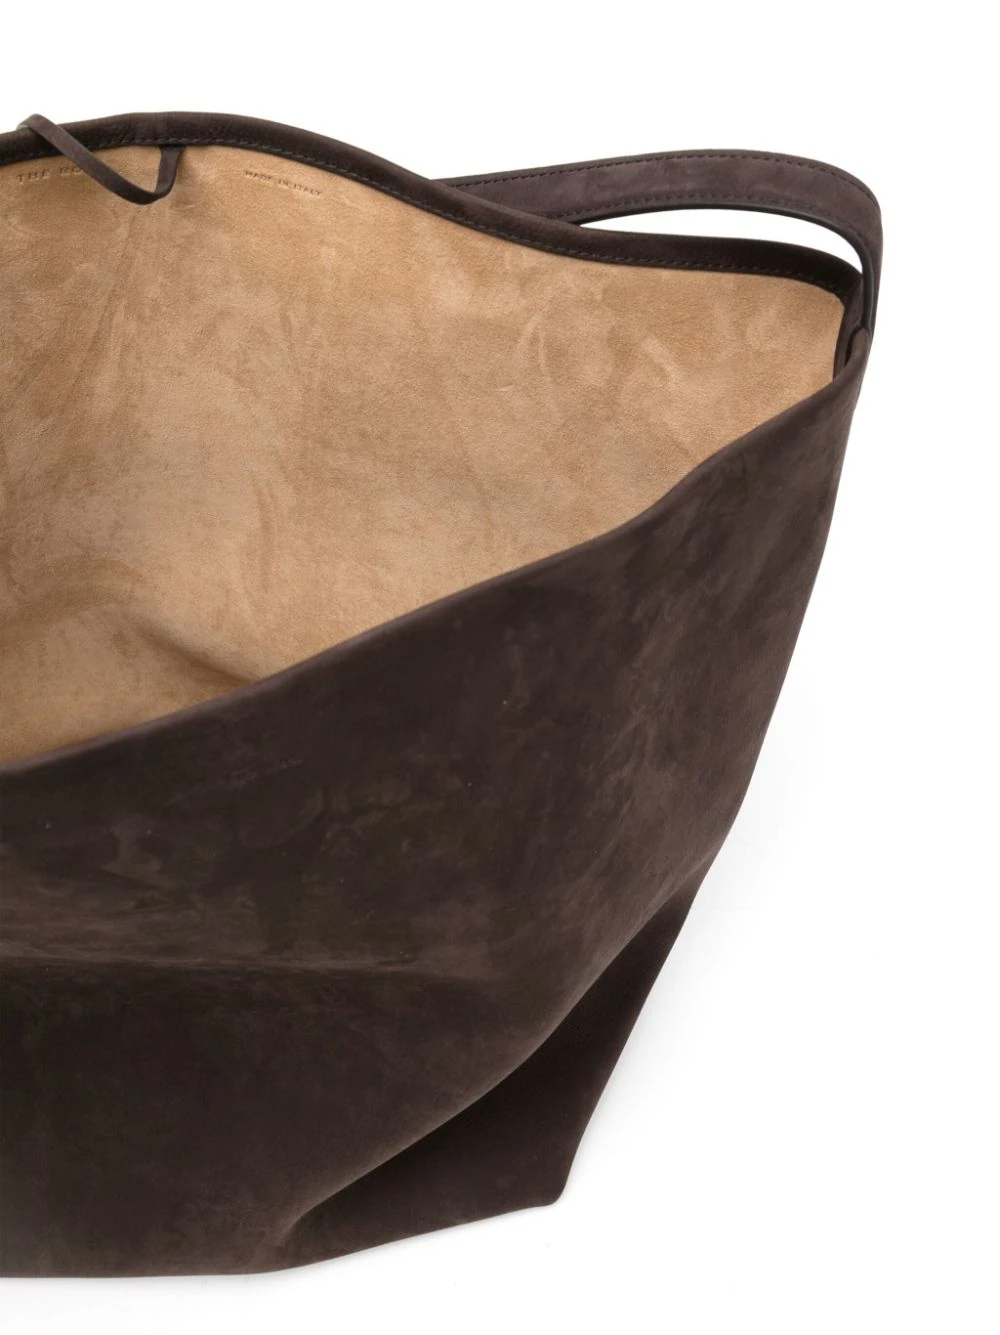 Brown Park large leather tote bag, The Row